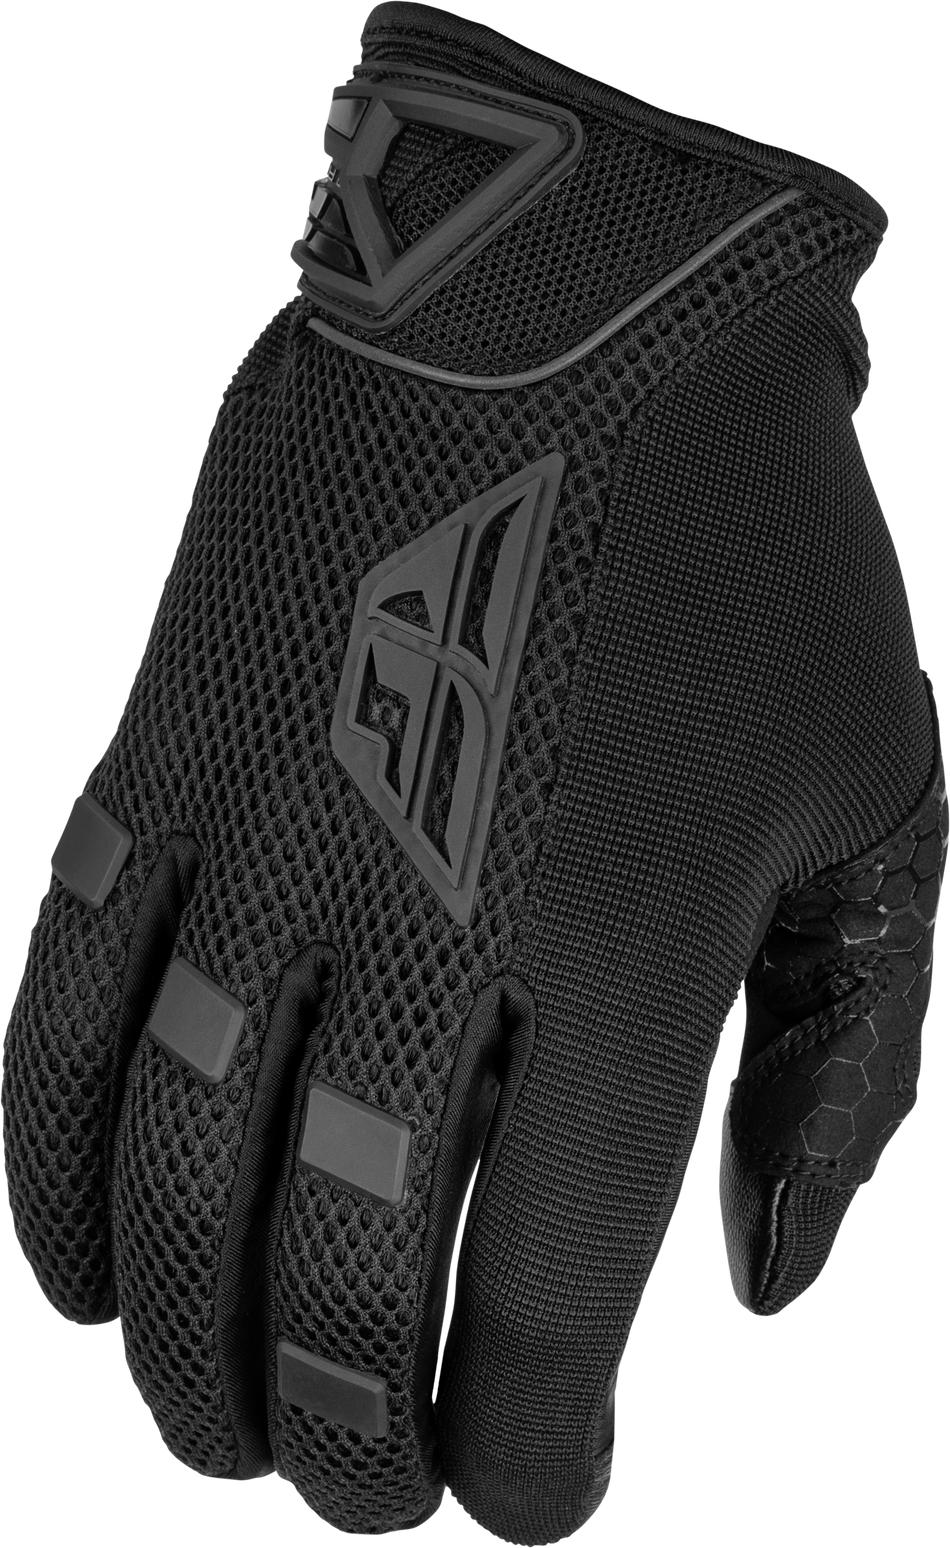 FLY RACING Coolpro Gloves Black Xl 476-4024X